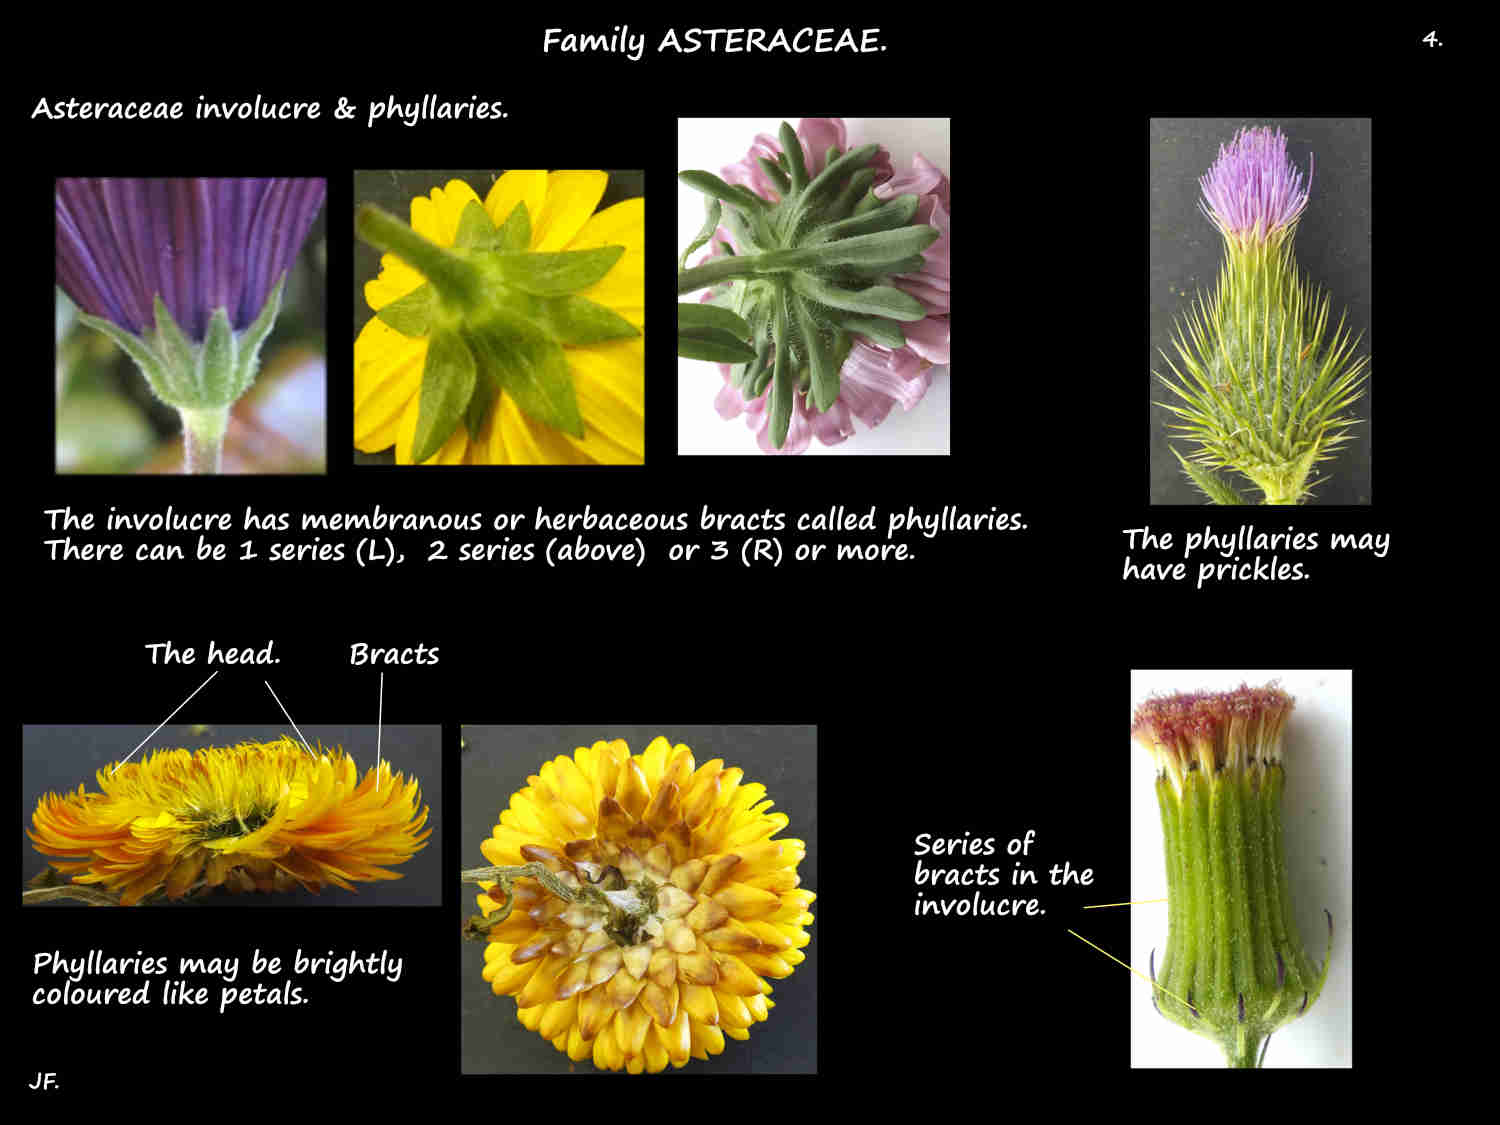 4 The involucre on Asteraceae heads